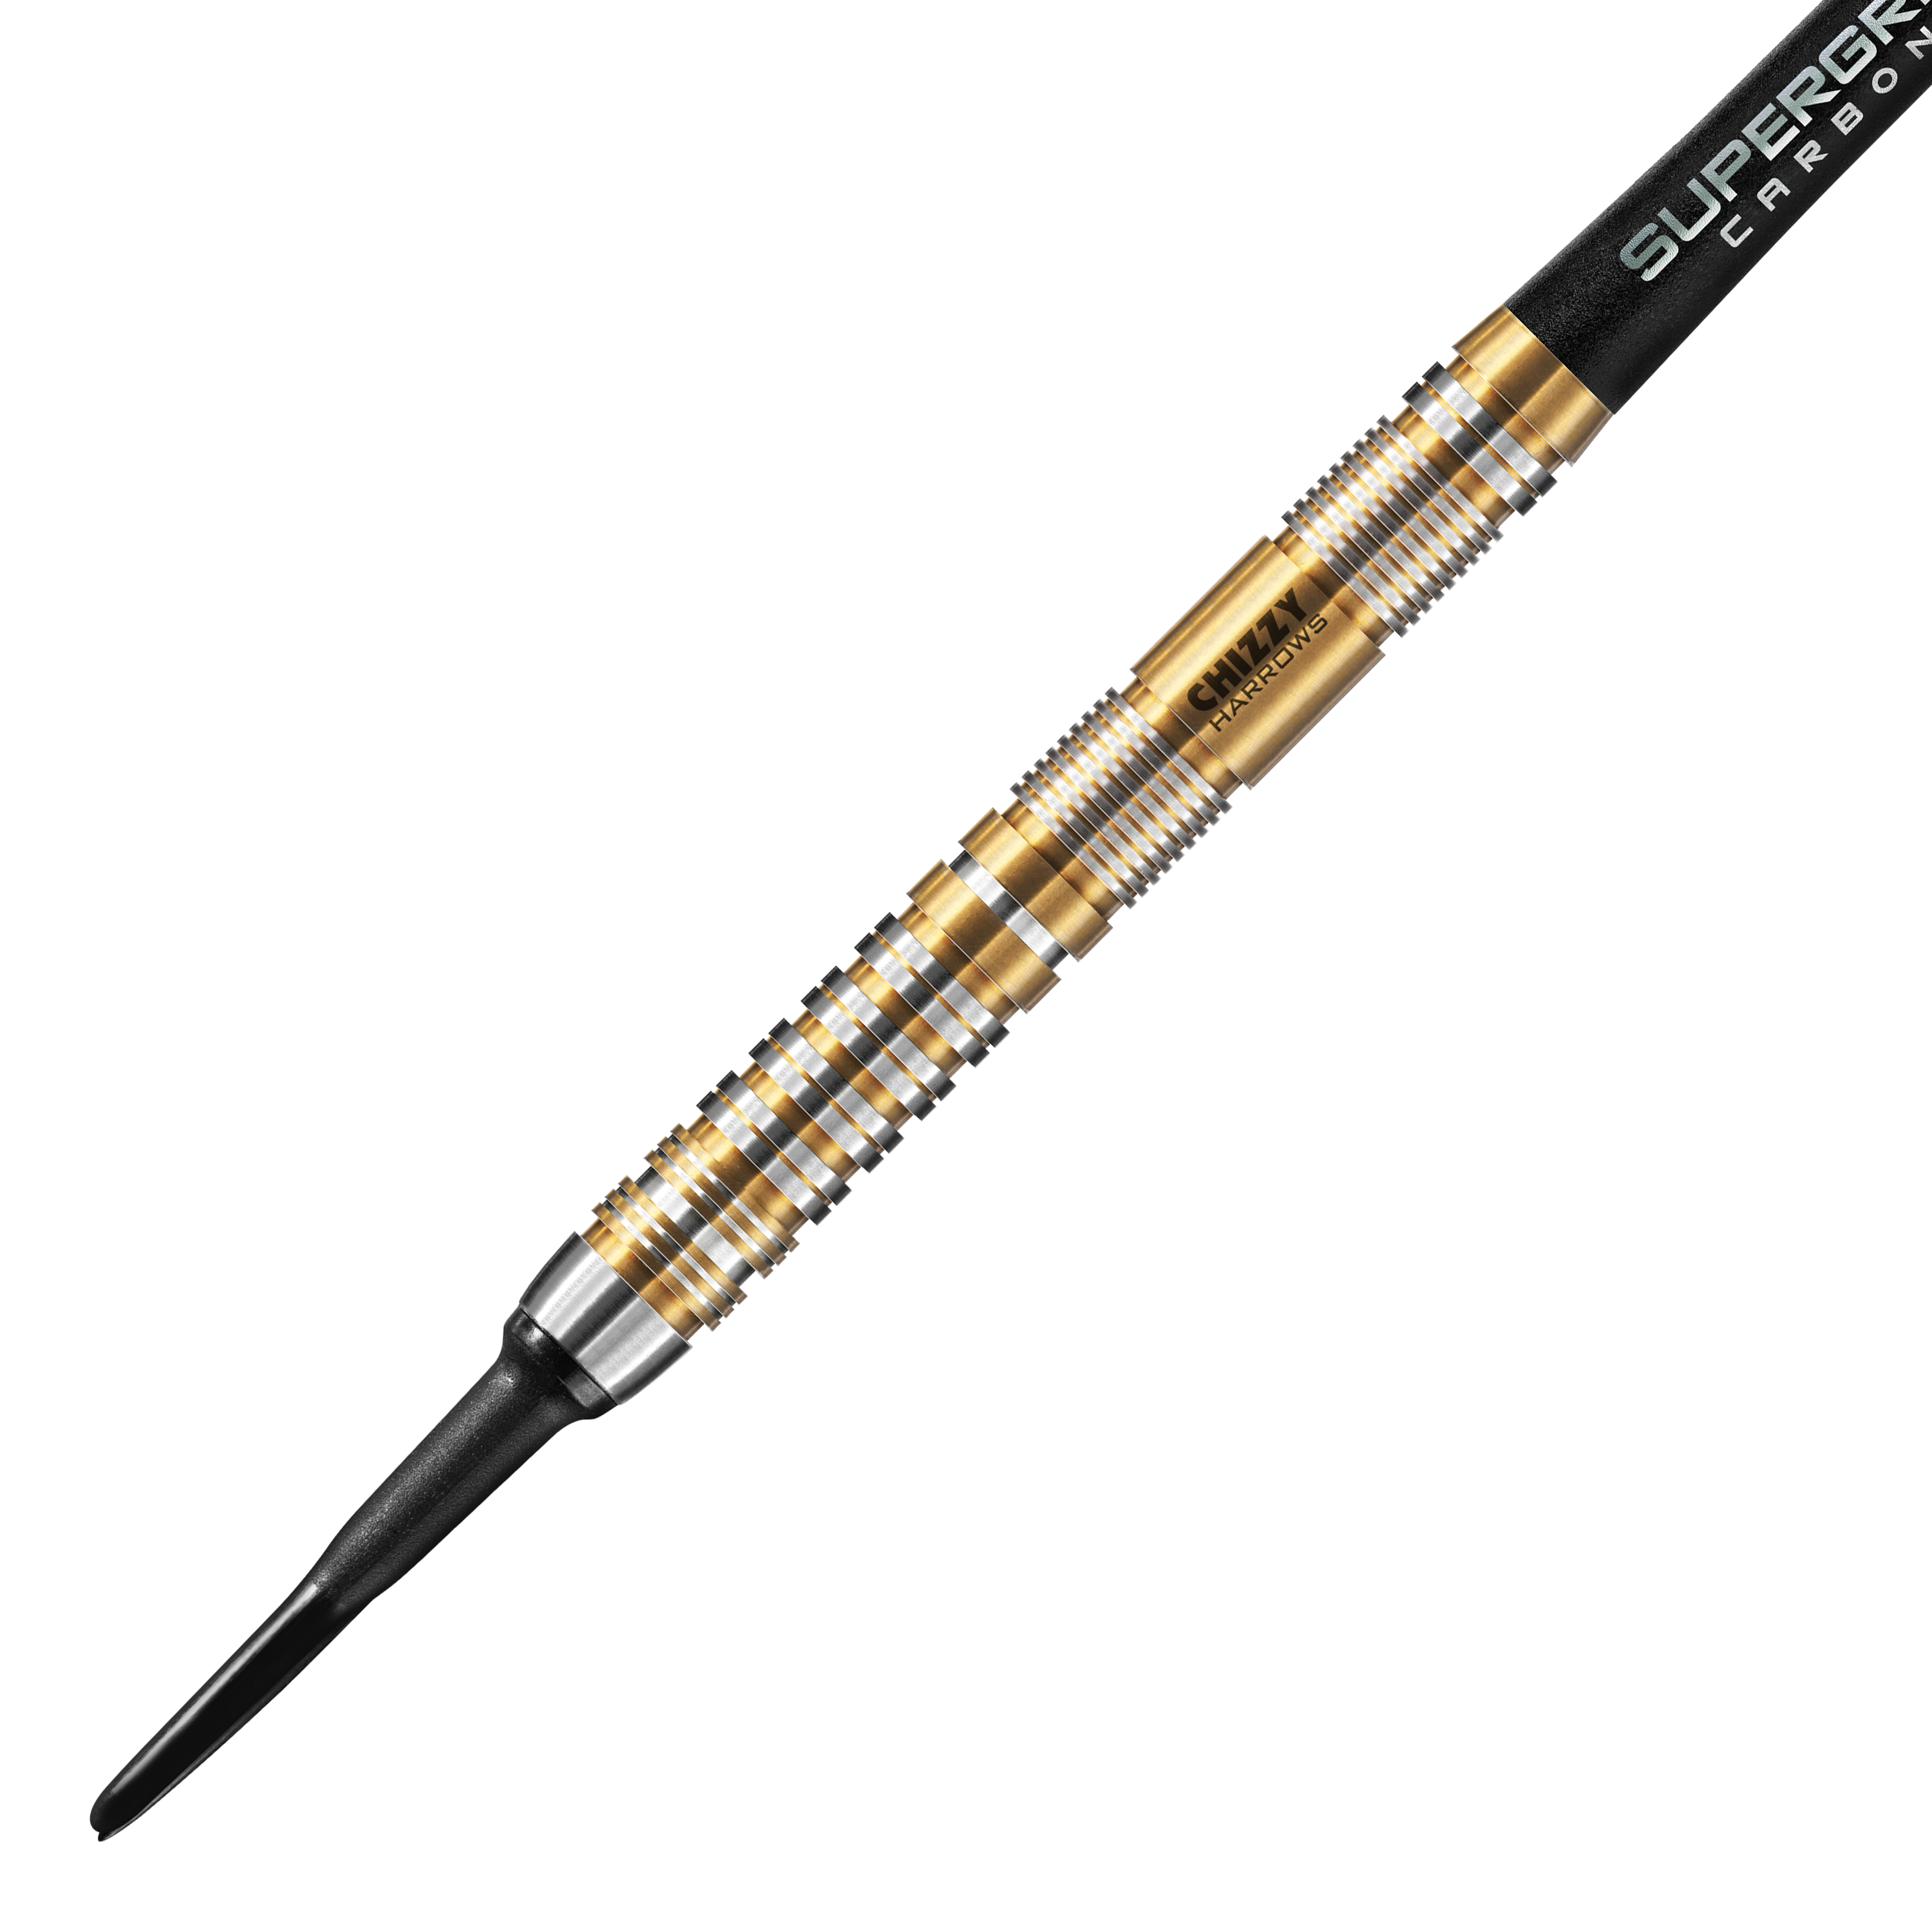 Harrows Dave Chisnall Chizzy 2024 Series 2 Softdarts